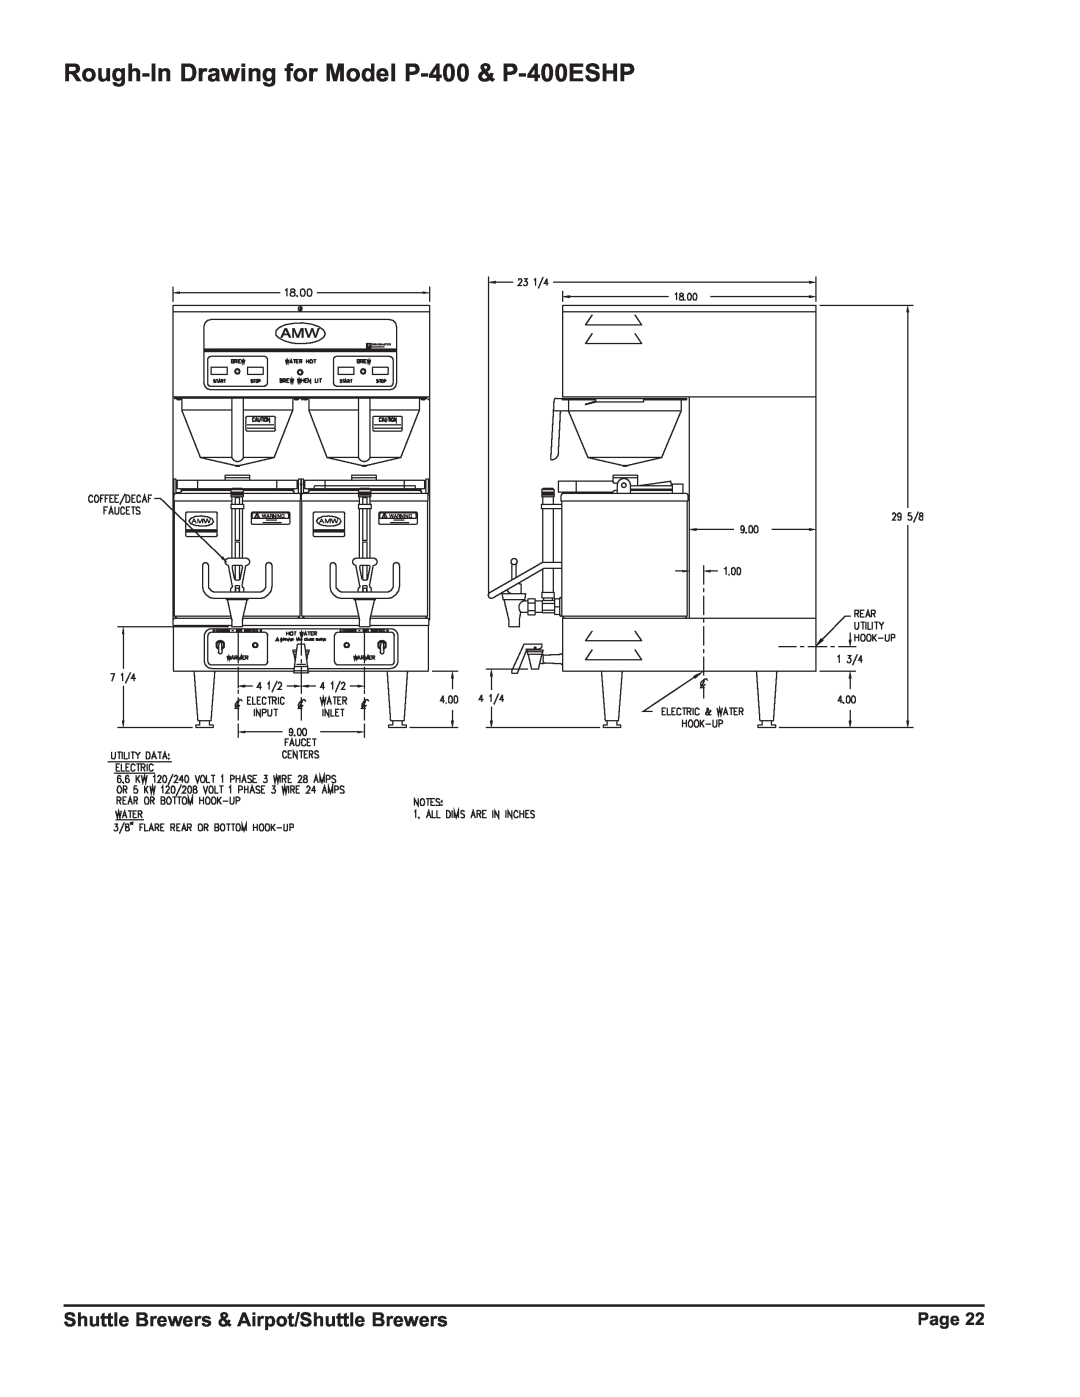 Grindmaster P400ESHP Rough-In Drawing for Model P-400 & P-400ESHP, Shuttle Brewers & Airpot/Shuttle Brewers 